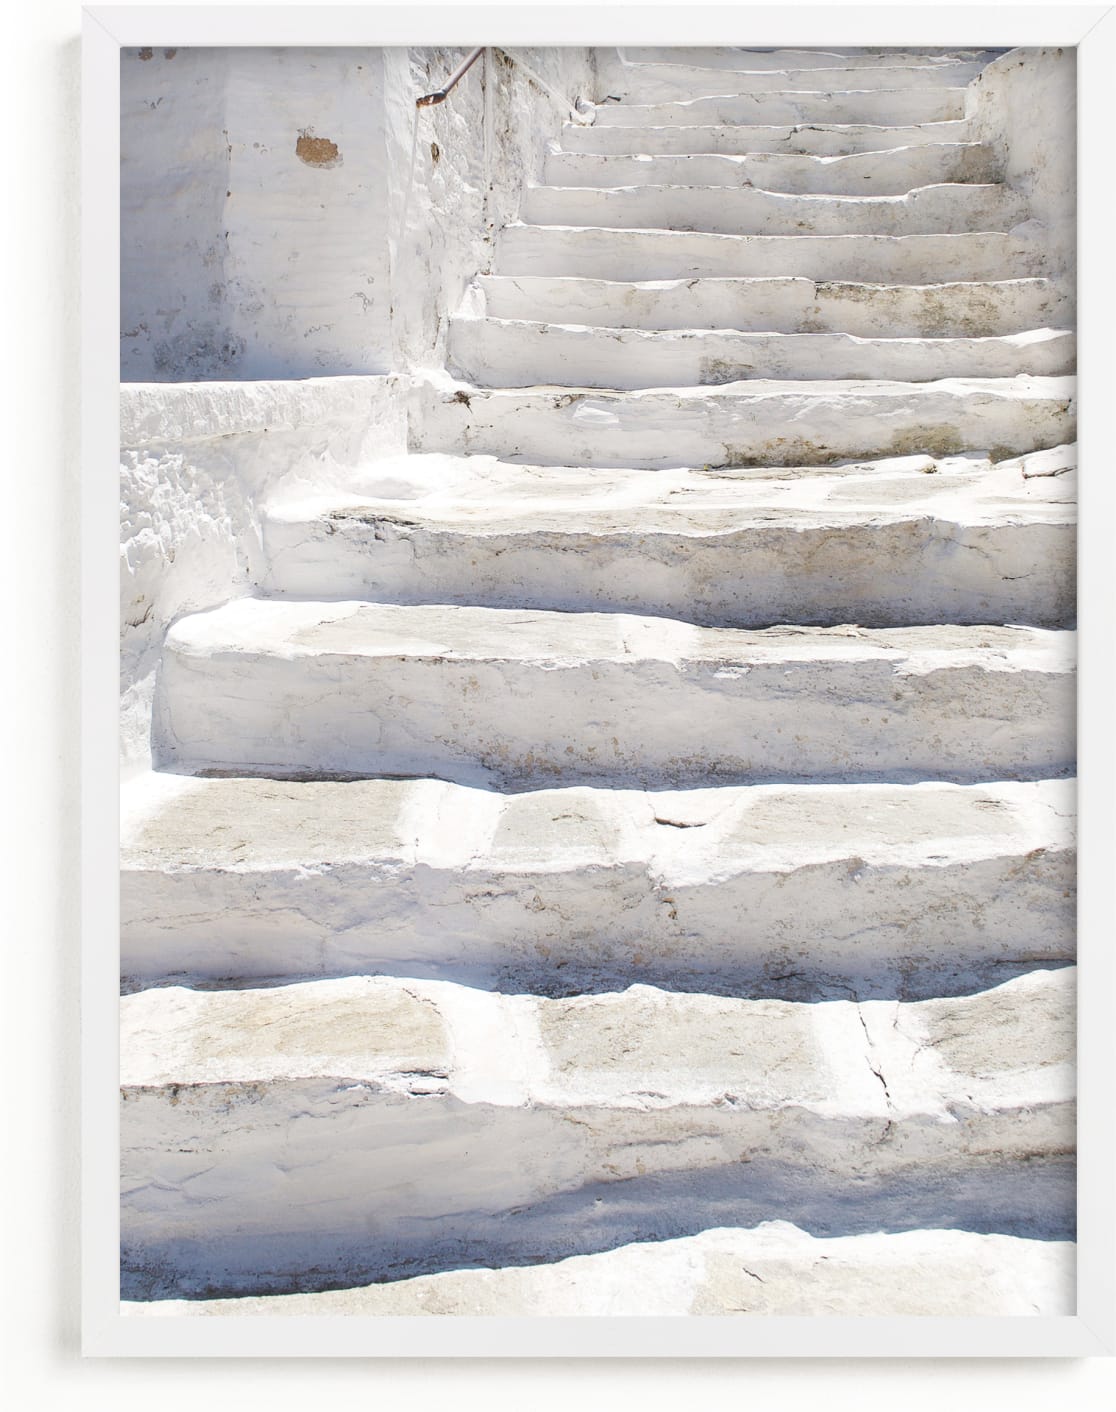 This is a white art by Marimba Morris called White stairs.